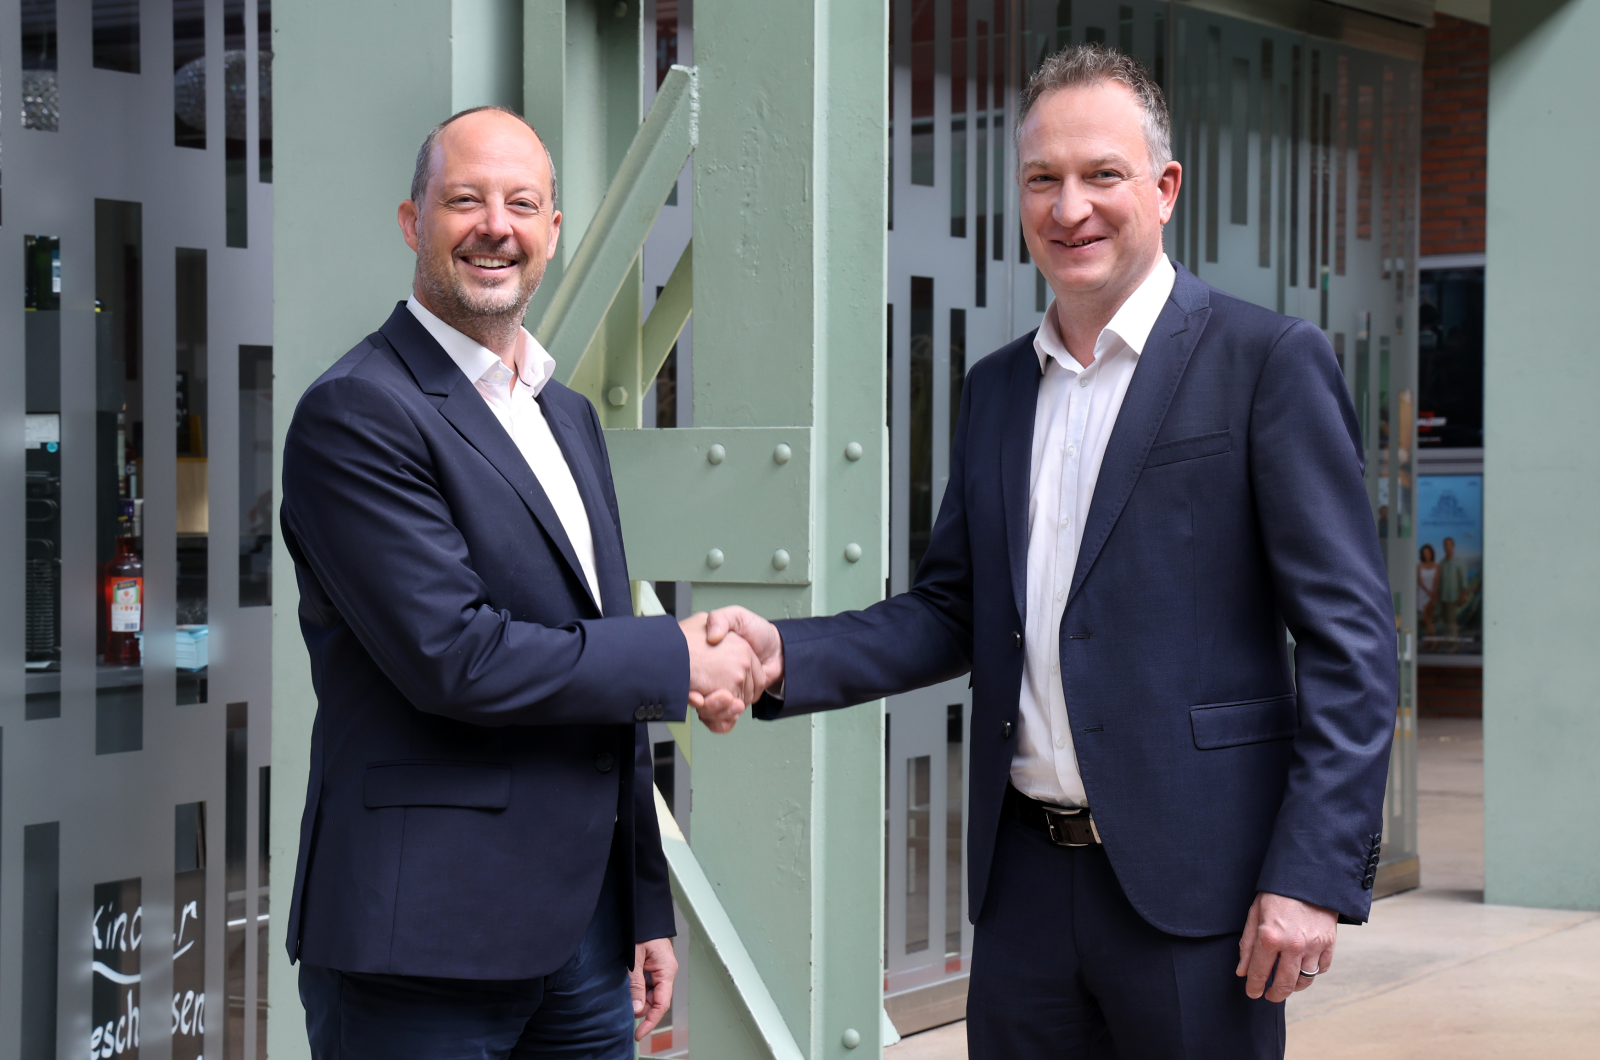 SPIE Switzerland and Oxoia enter into a strategic partnership